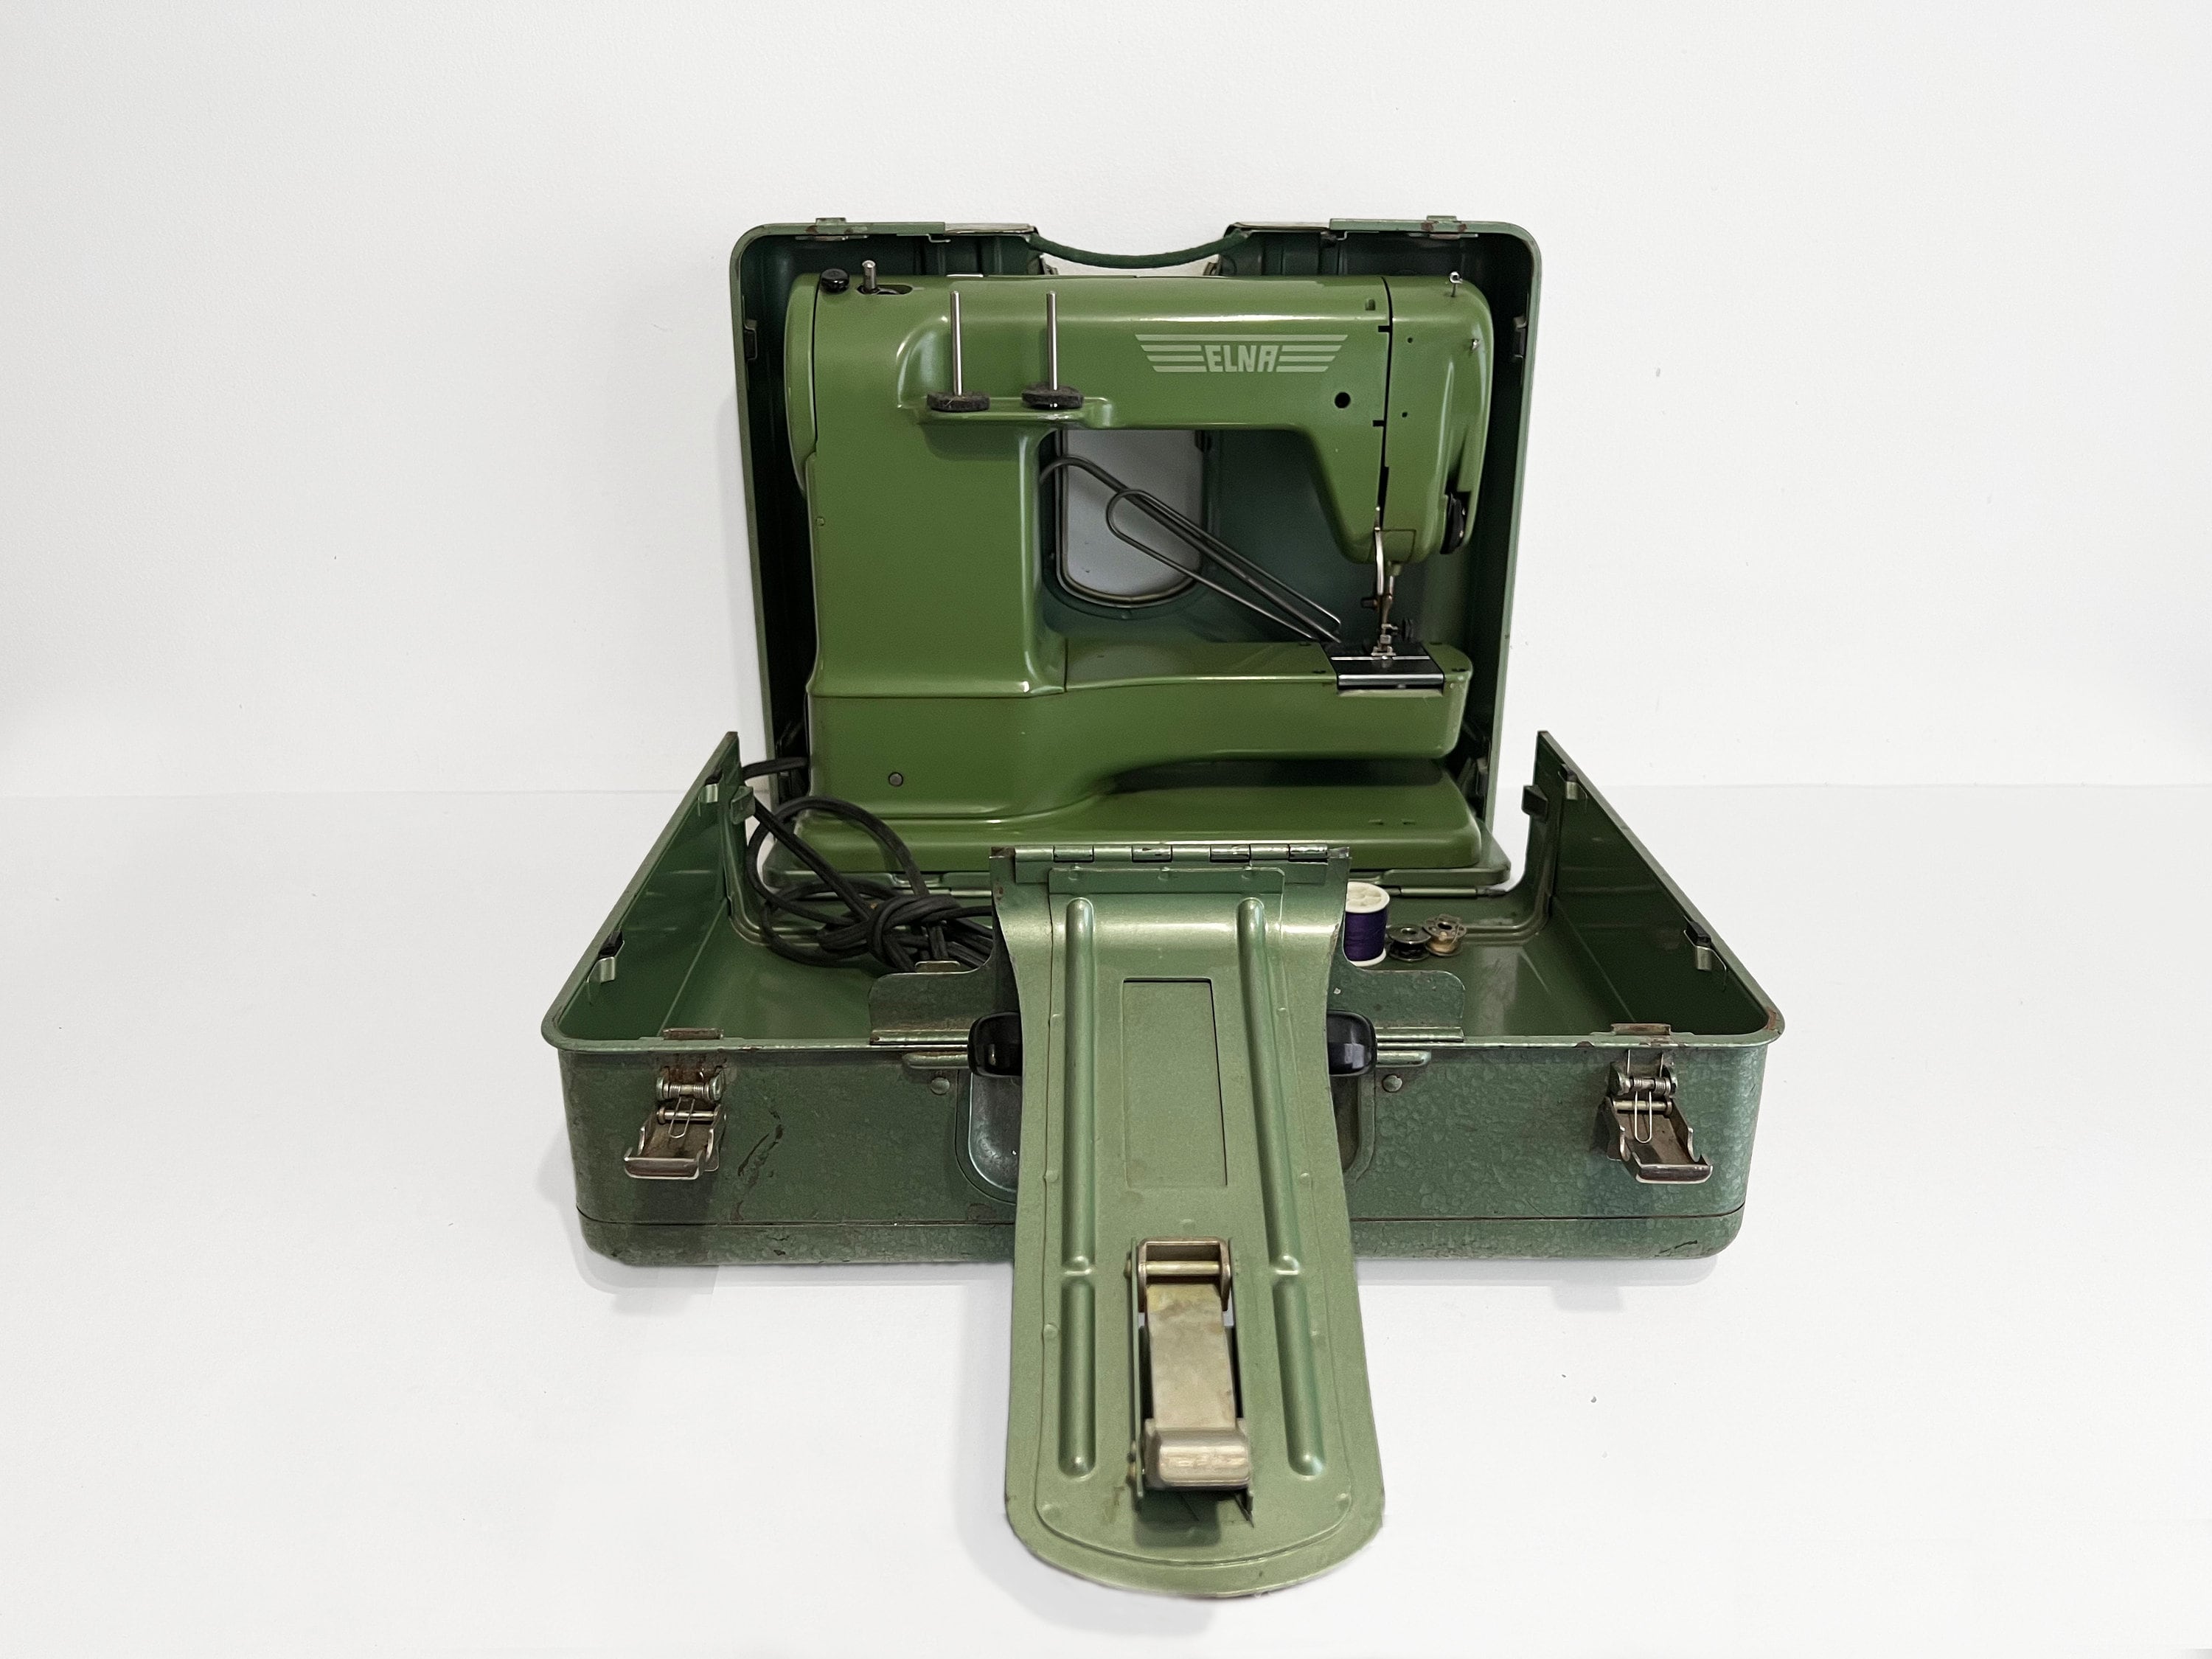 Elna Supermatic 722010 Vintage Sewing Machine Green with Case and Cam